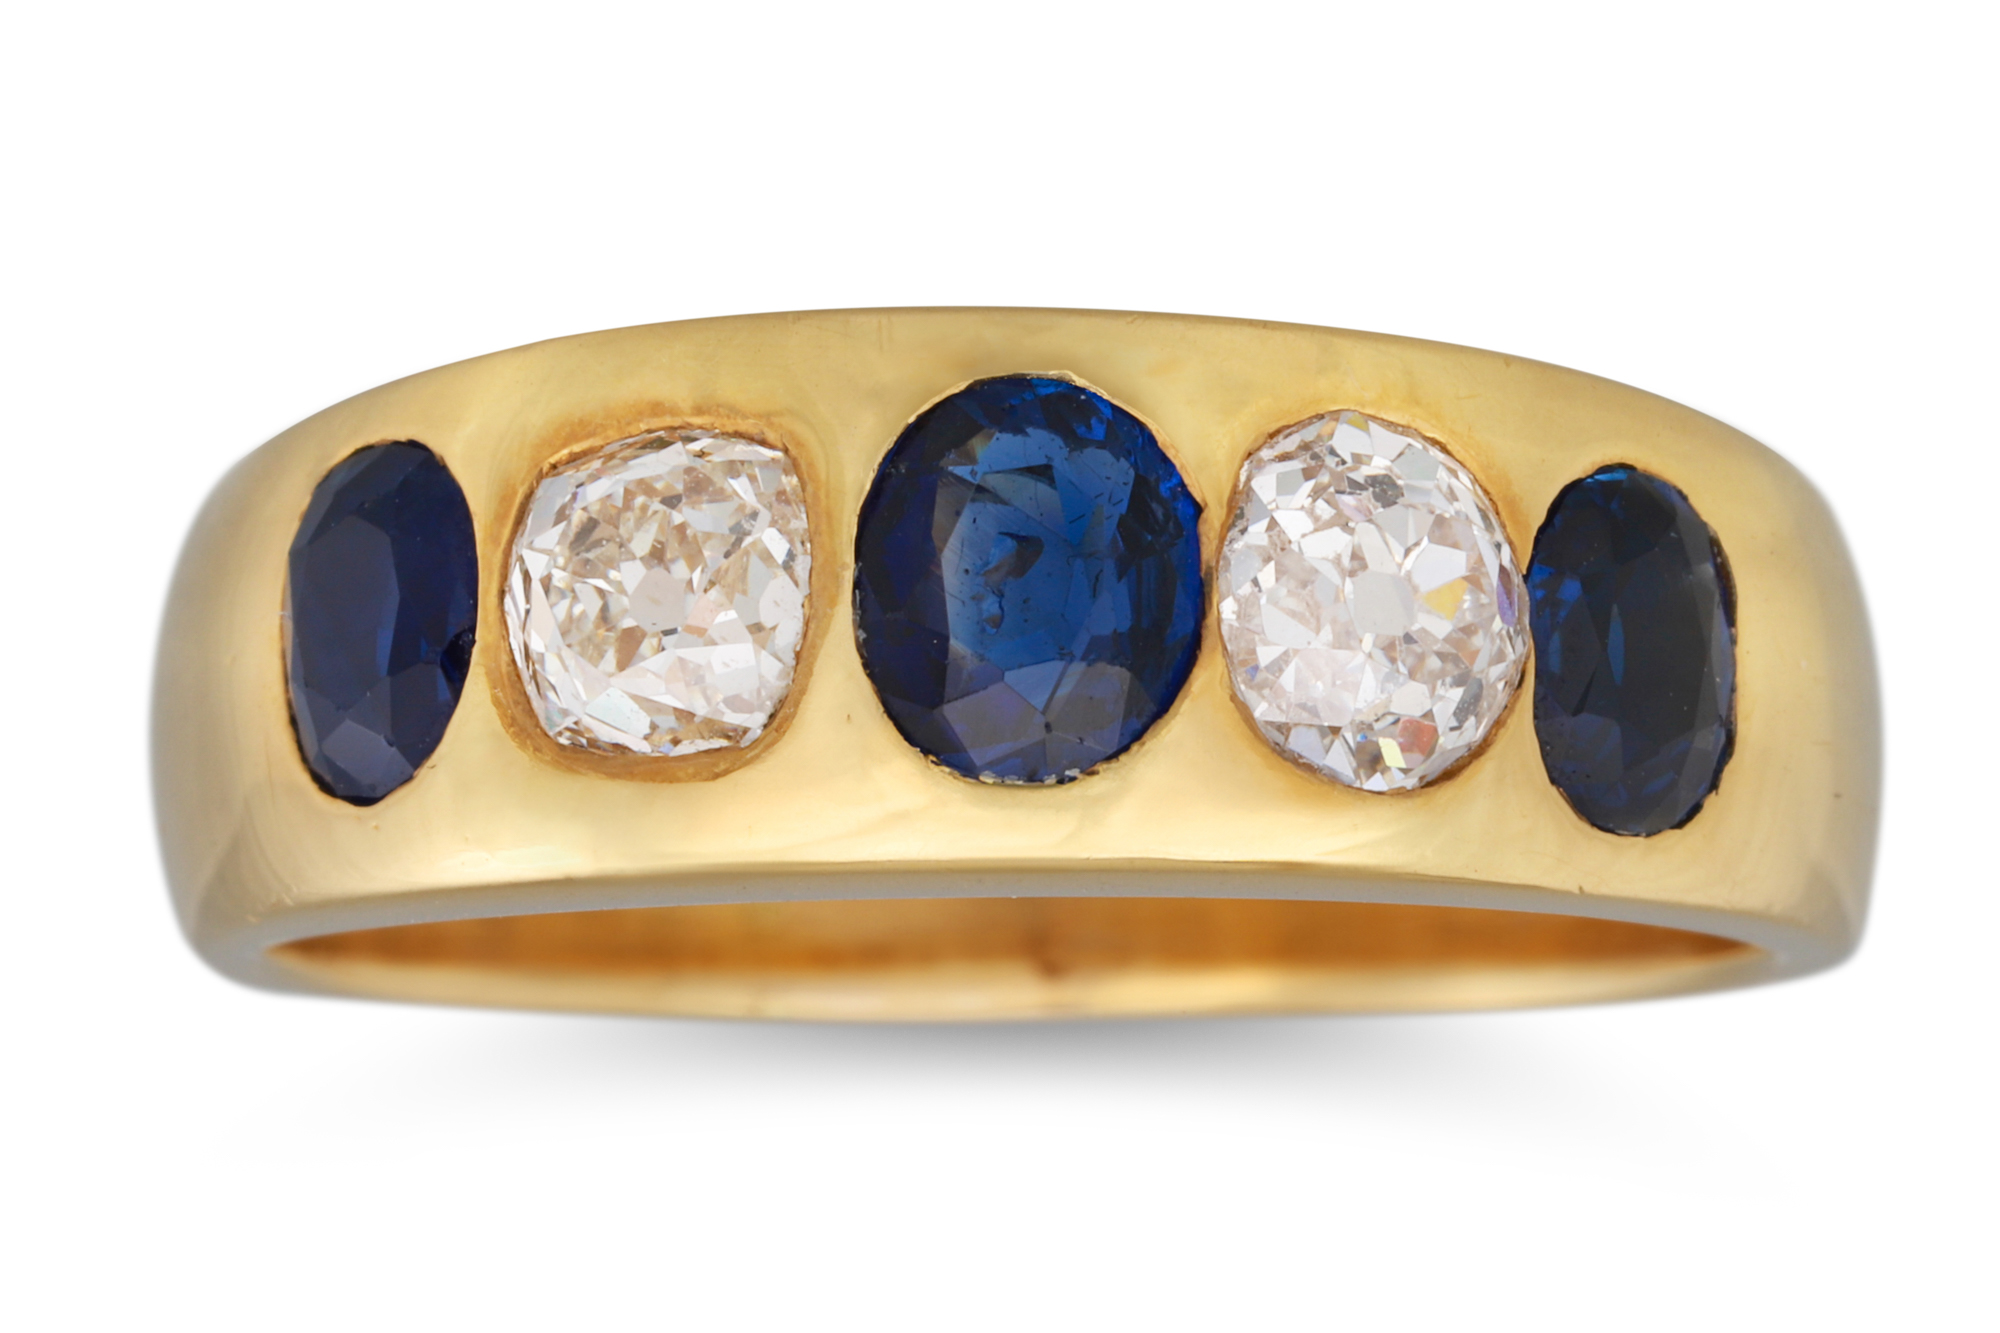 AN ANTIQUE DIAMOND AND SAPPHIRE RING, inset with old cut diamonds and oval sapphires, mounted in